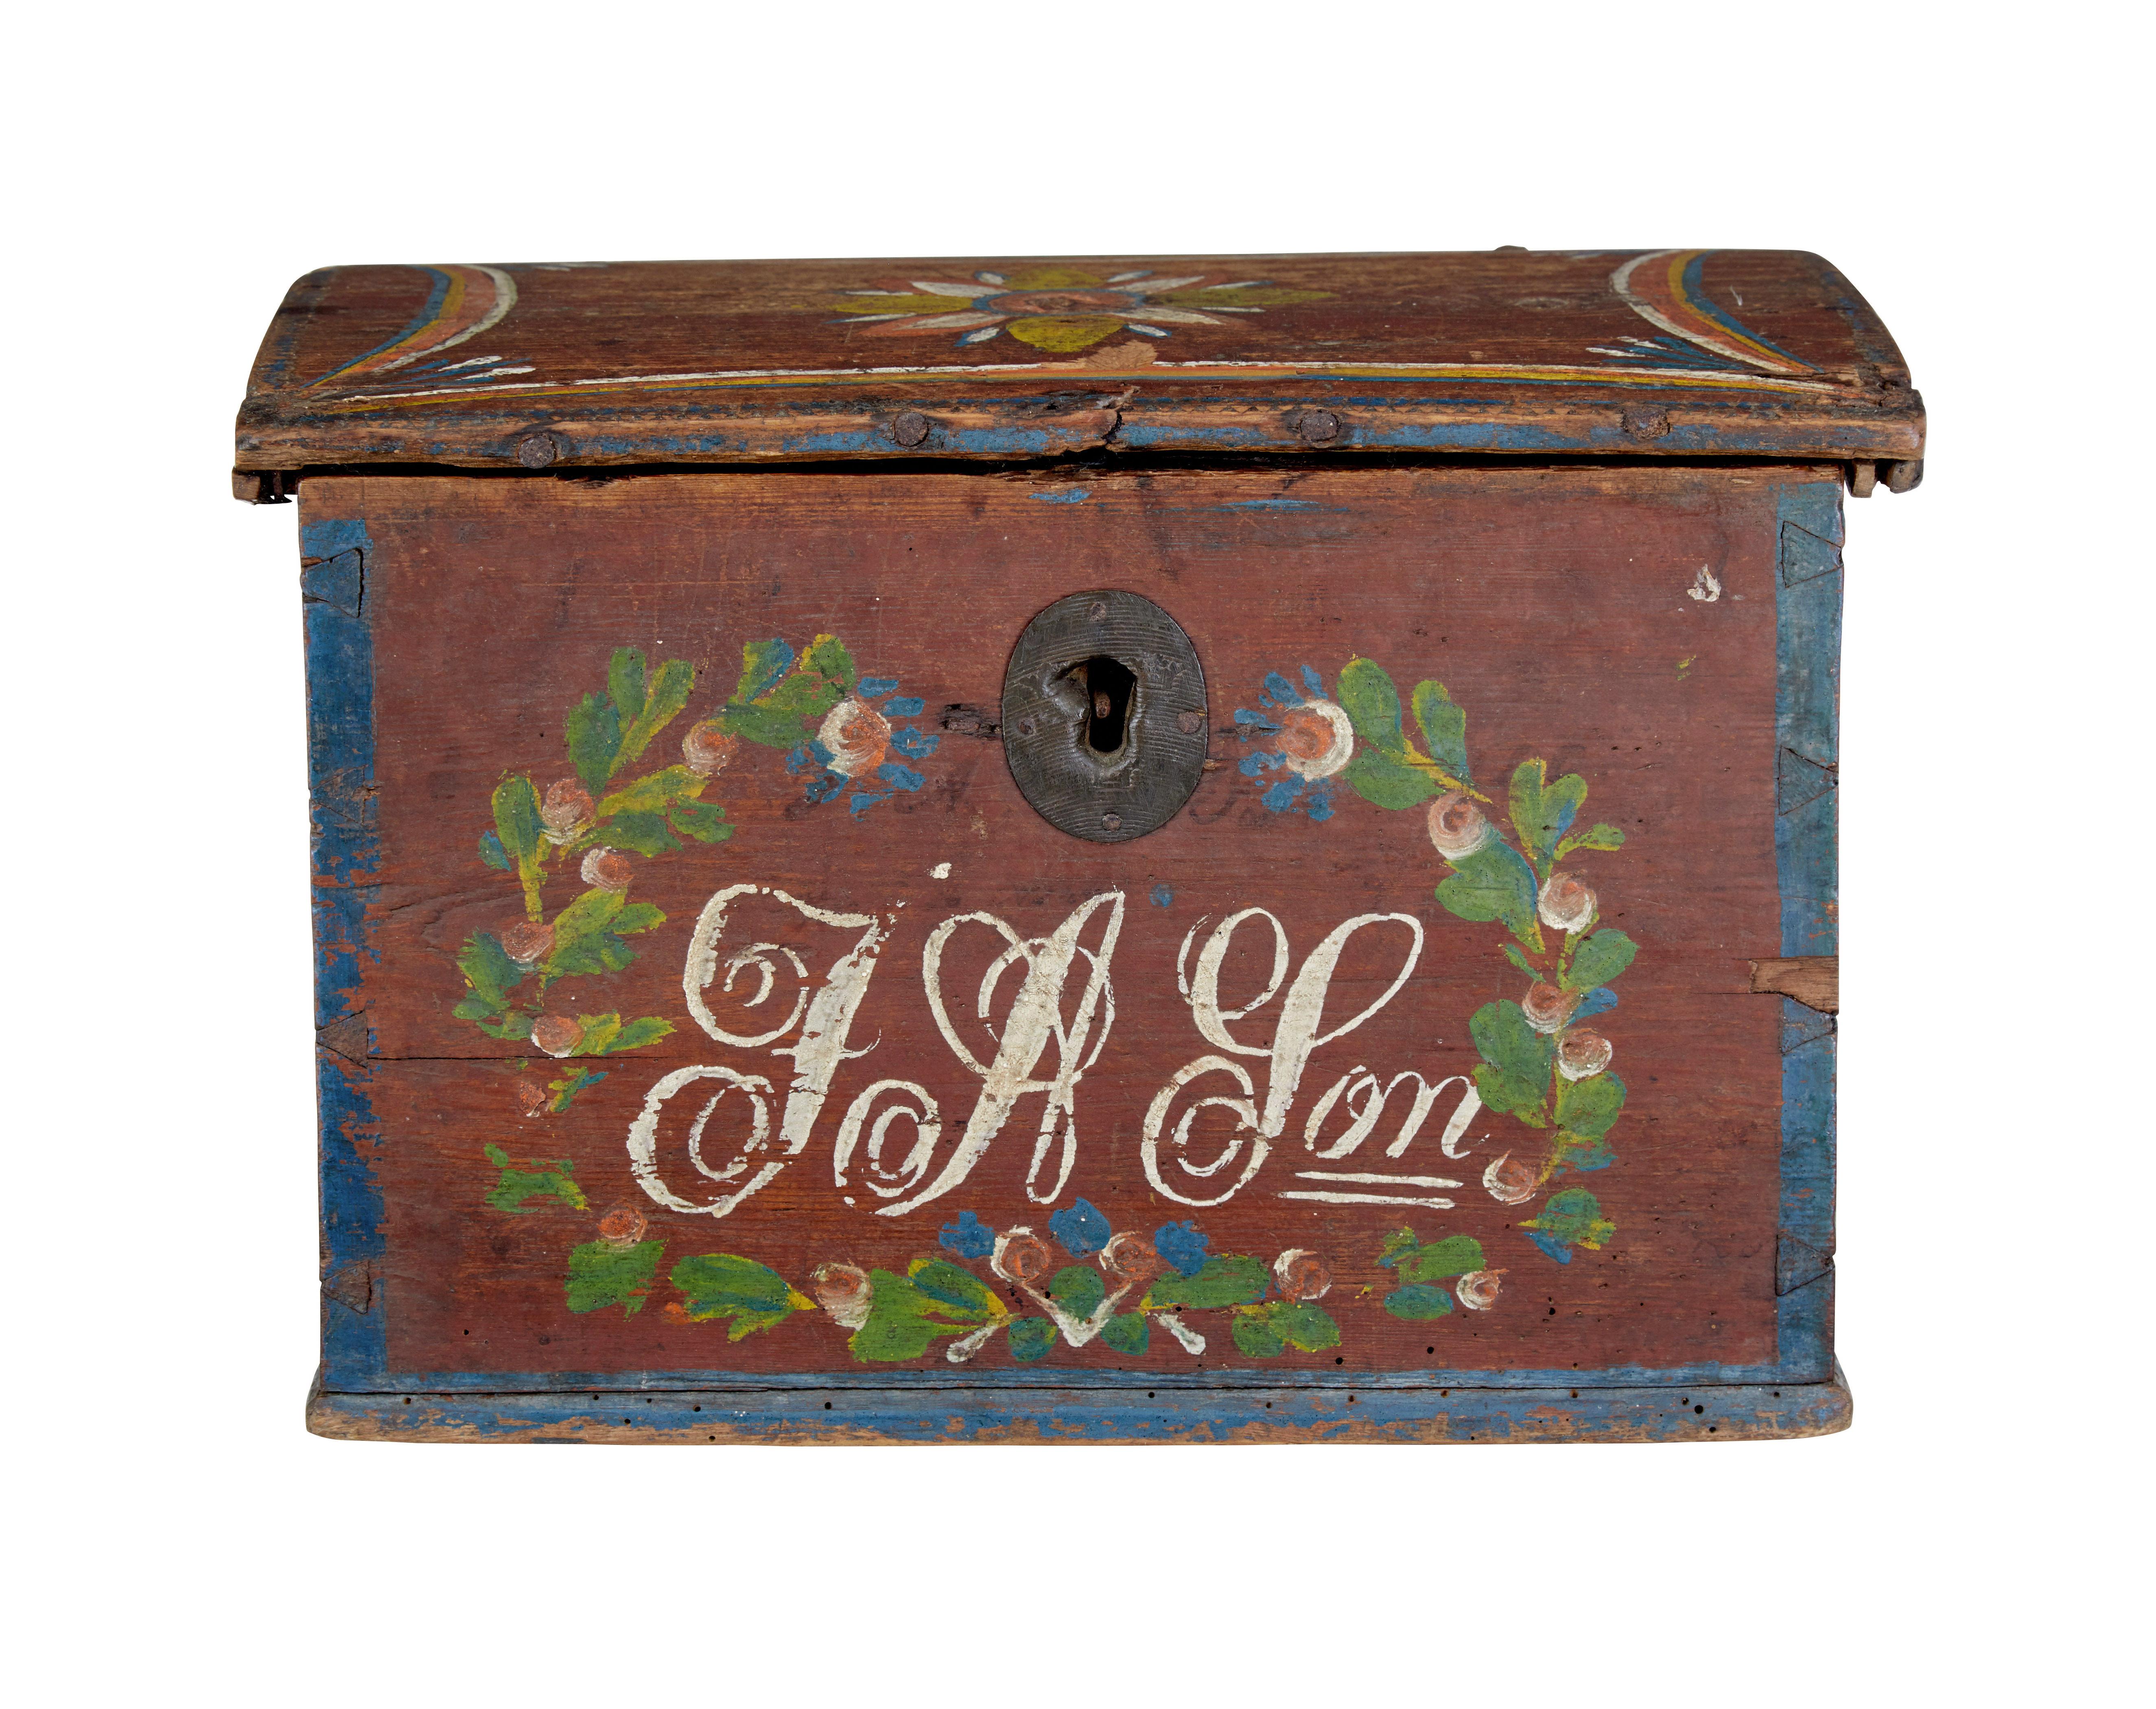 Scandinavian hand painted folk art pine box, circa 1850.

Fine example of traditional Swedish hand painted woodenware.

Slight dome topped lid which opens to reveal a unfitted interior. Plum coloured base colour, decorated in hand painted